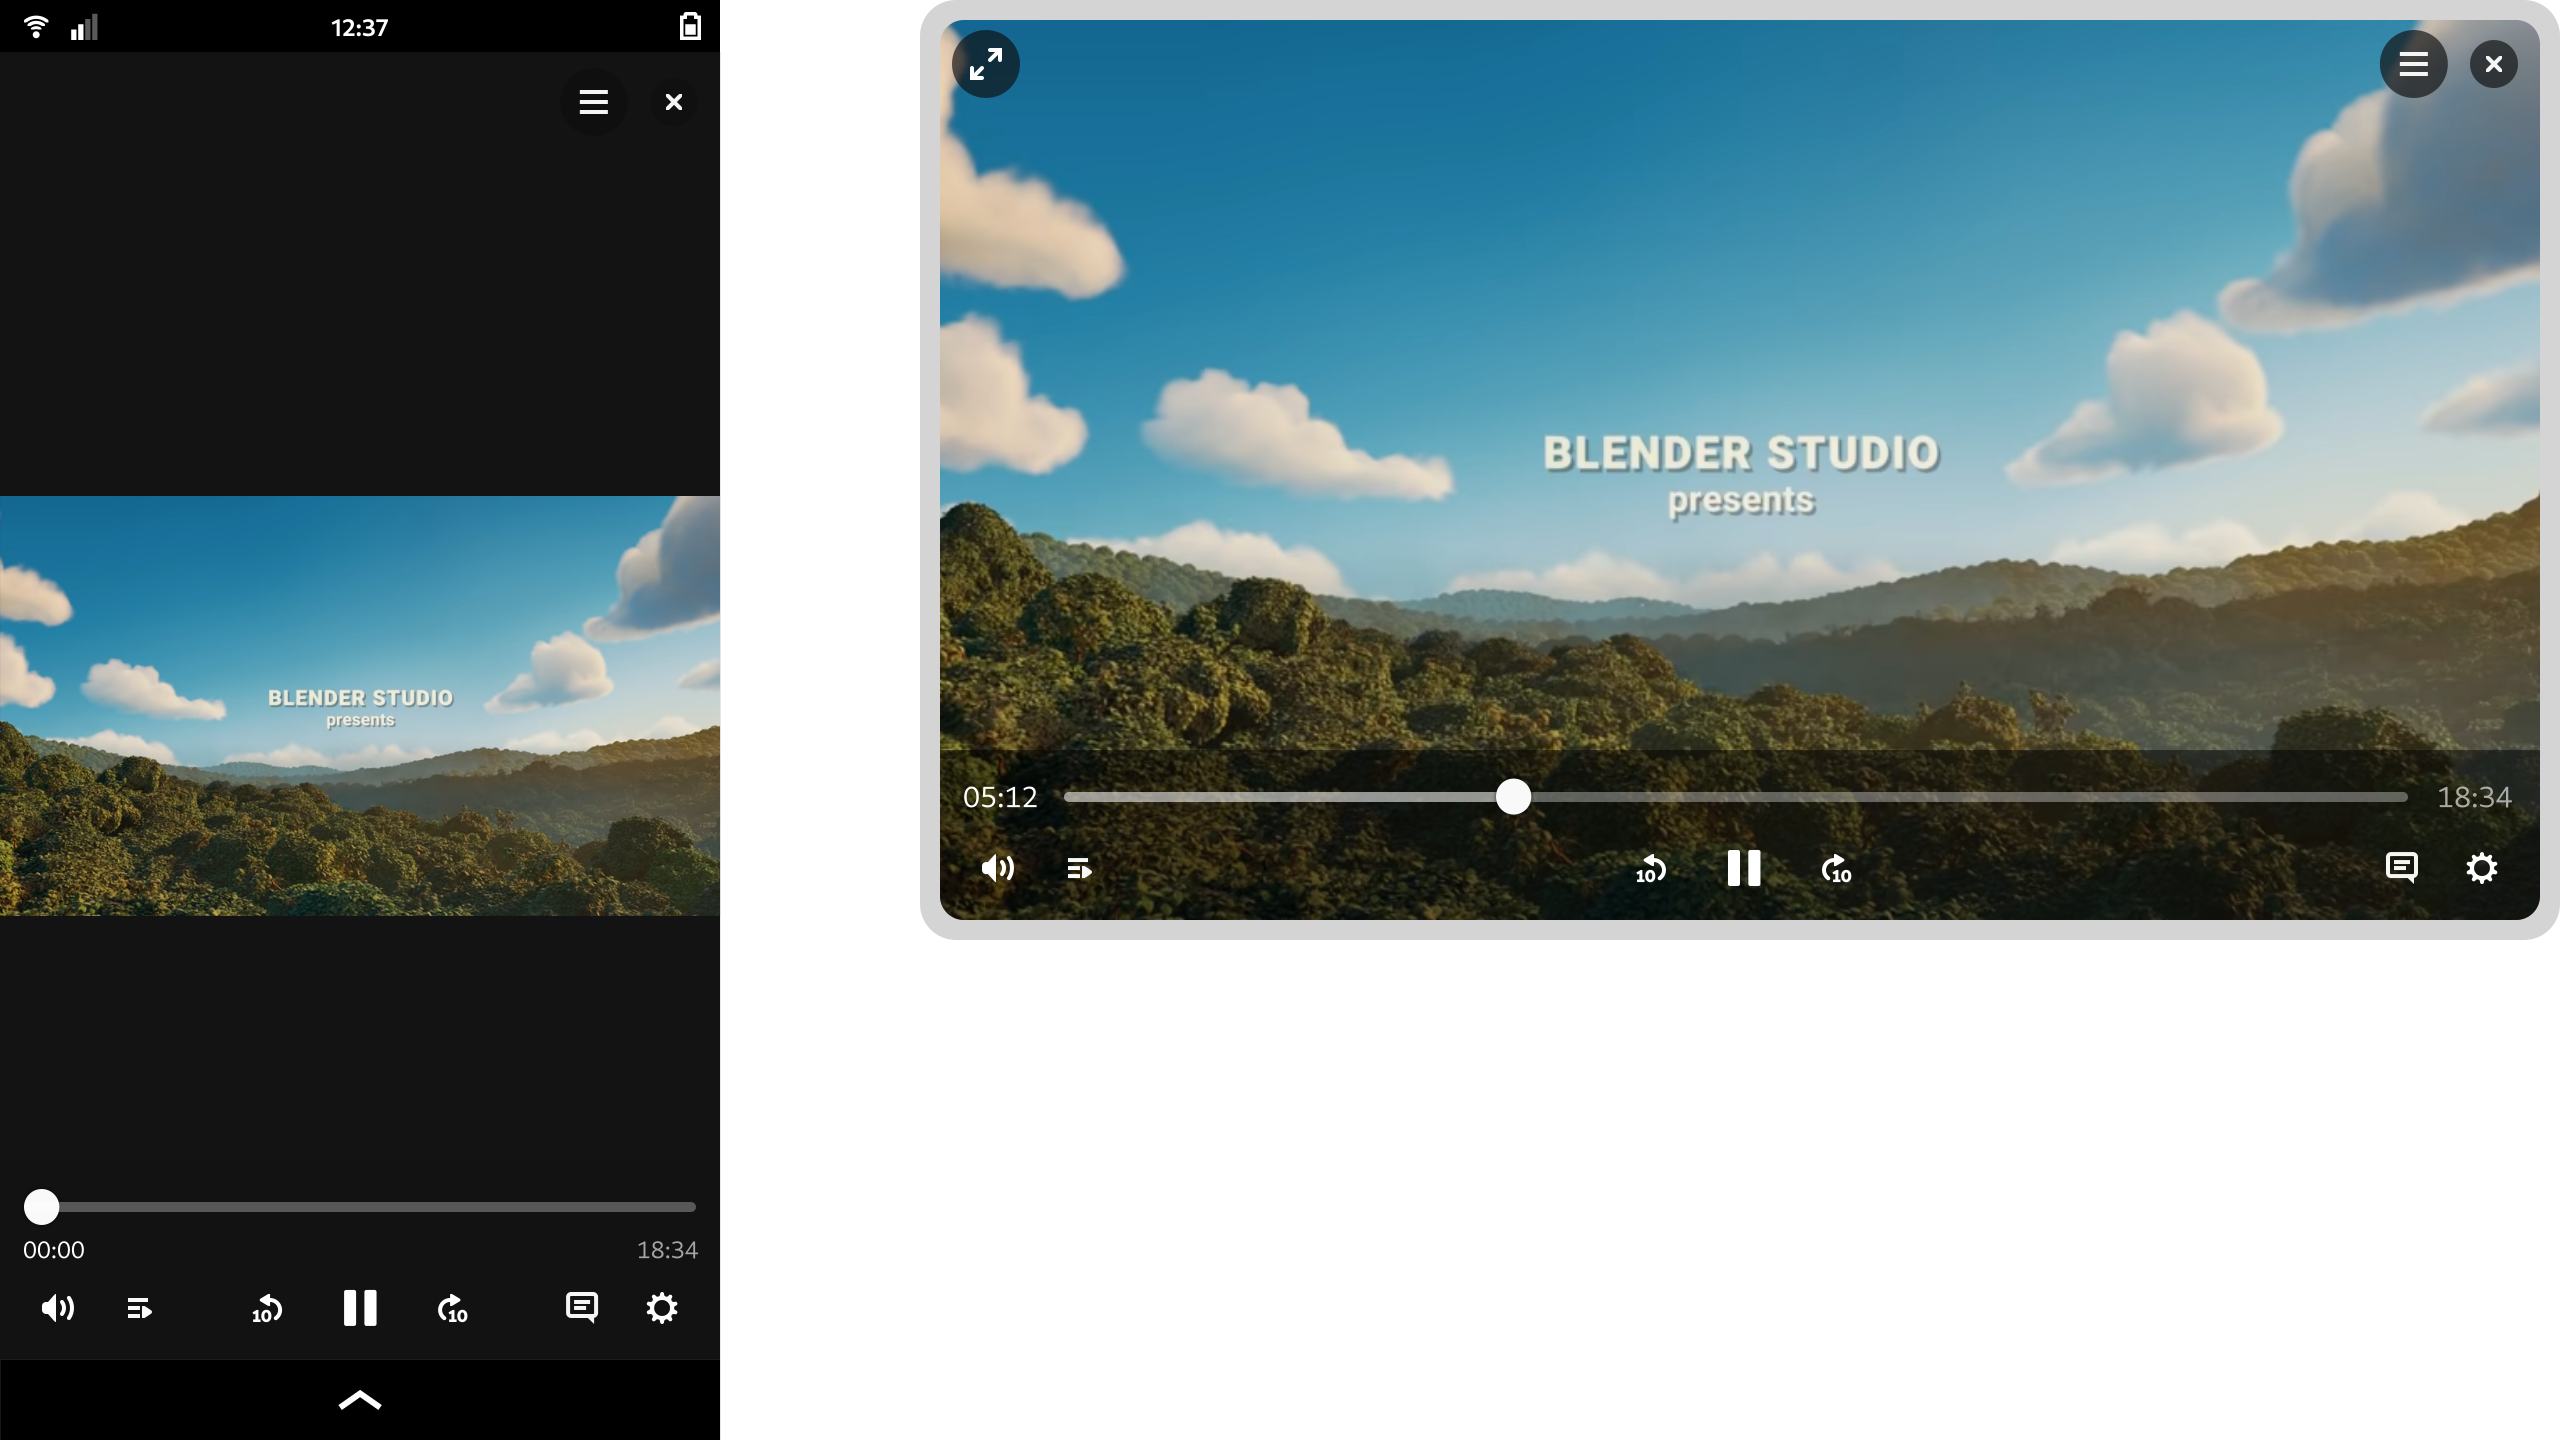 Two mockups of the videos app, showing the window at different sizes and aspect ratios